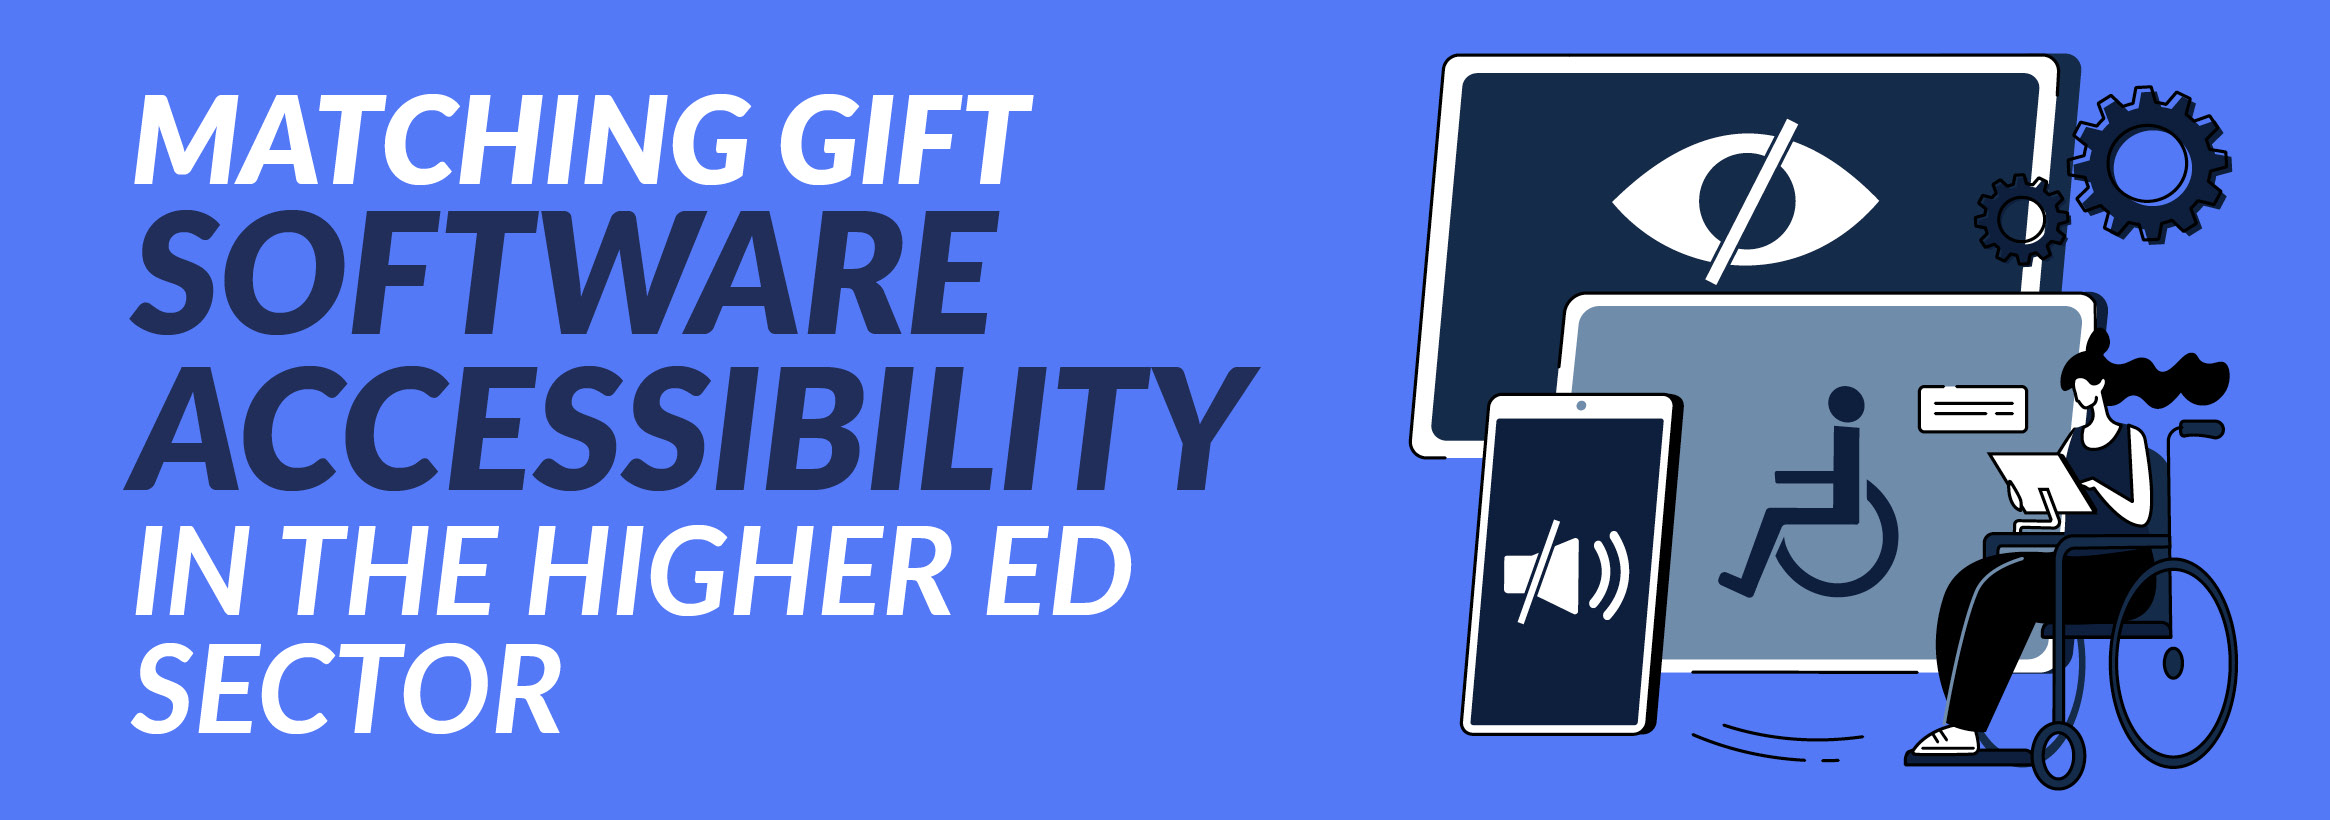 Matching Gift Software Accessibility in the Higher Ed Sector [Feature Image with Title Text]